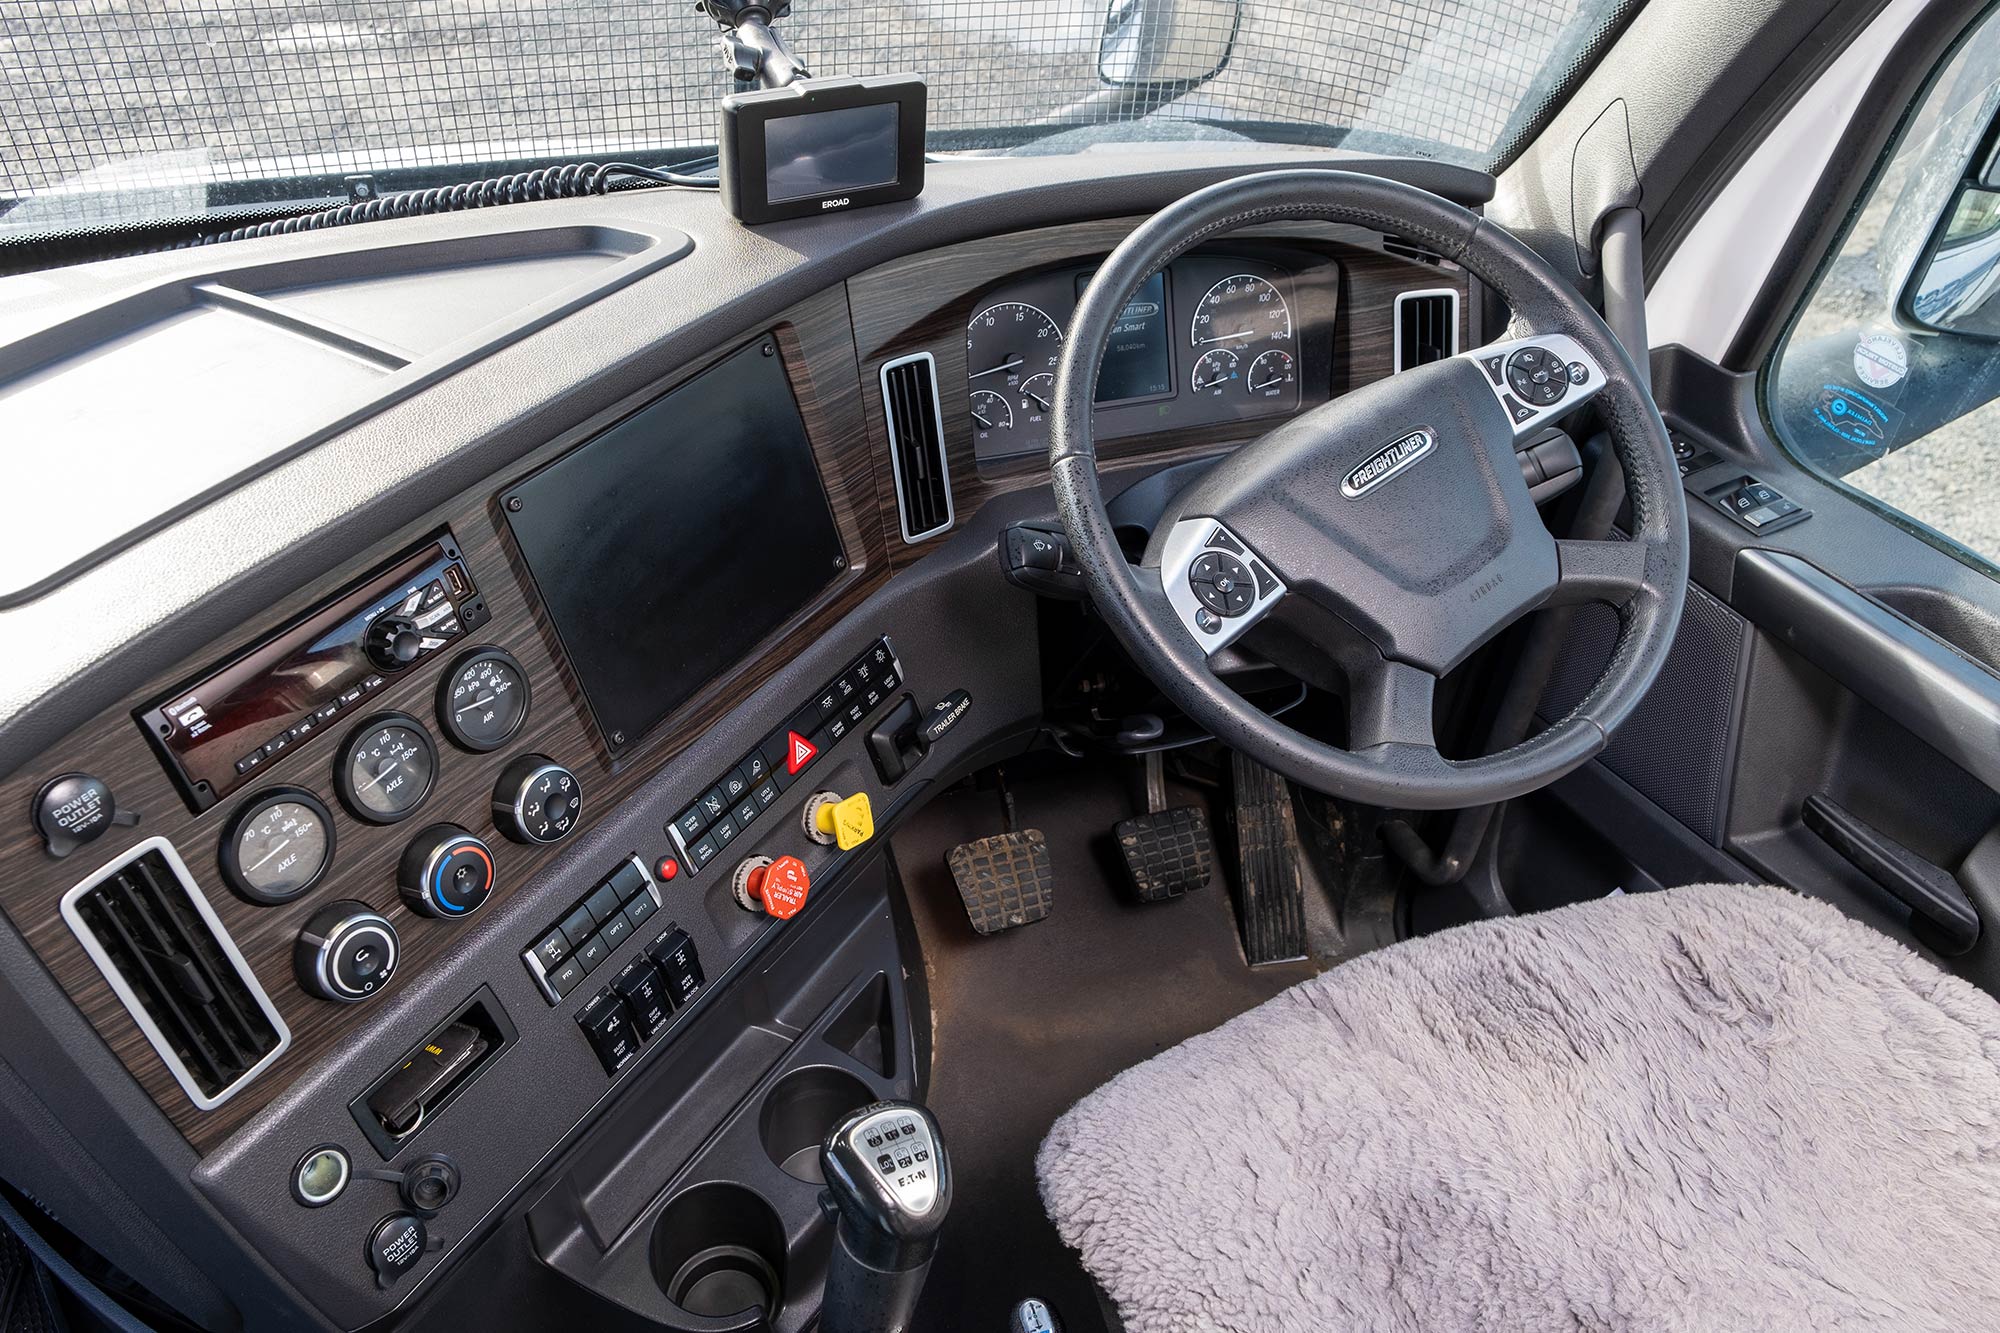 The cab of the heavy-duty Freightliner Cascadia is modern and comfortable 